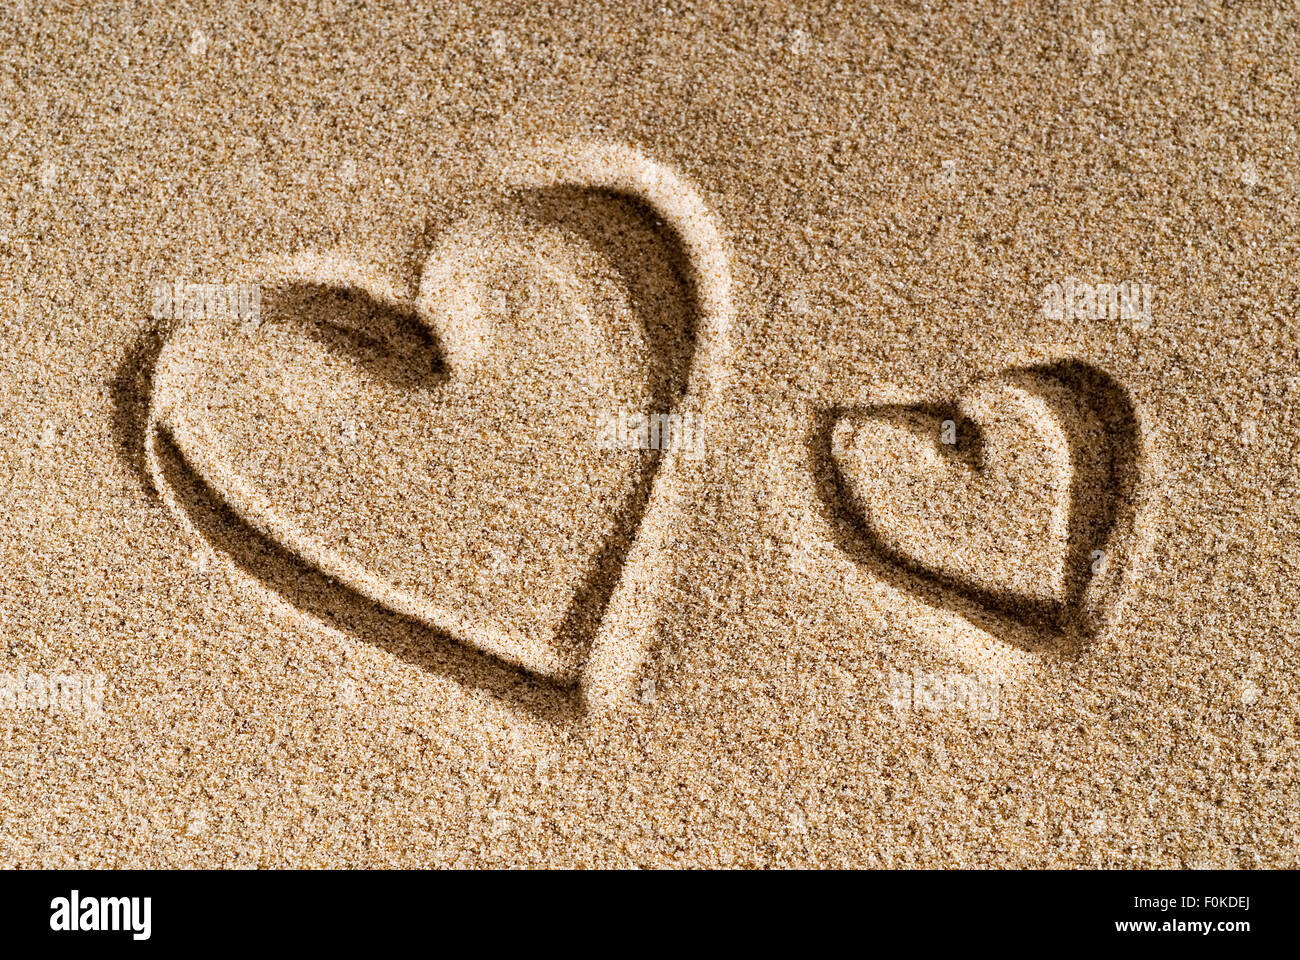 A heart painted in the sand Stock Photo